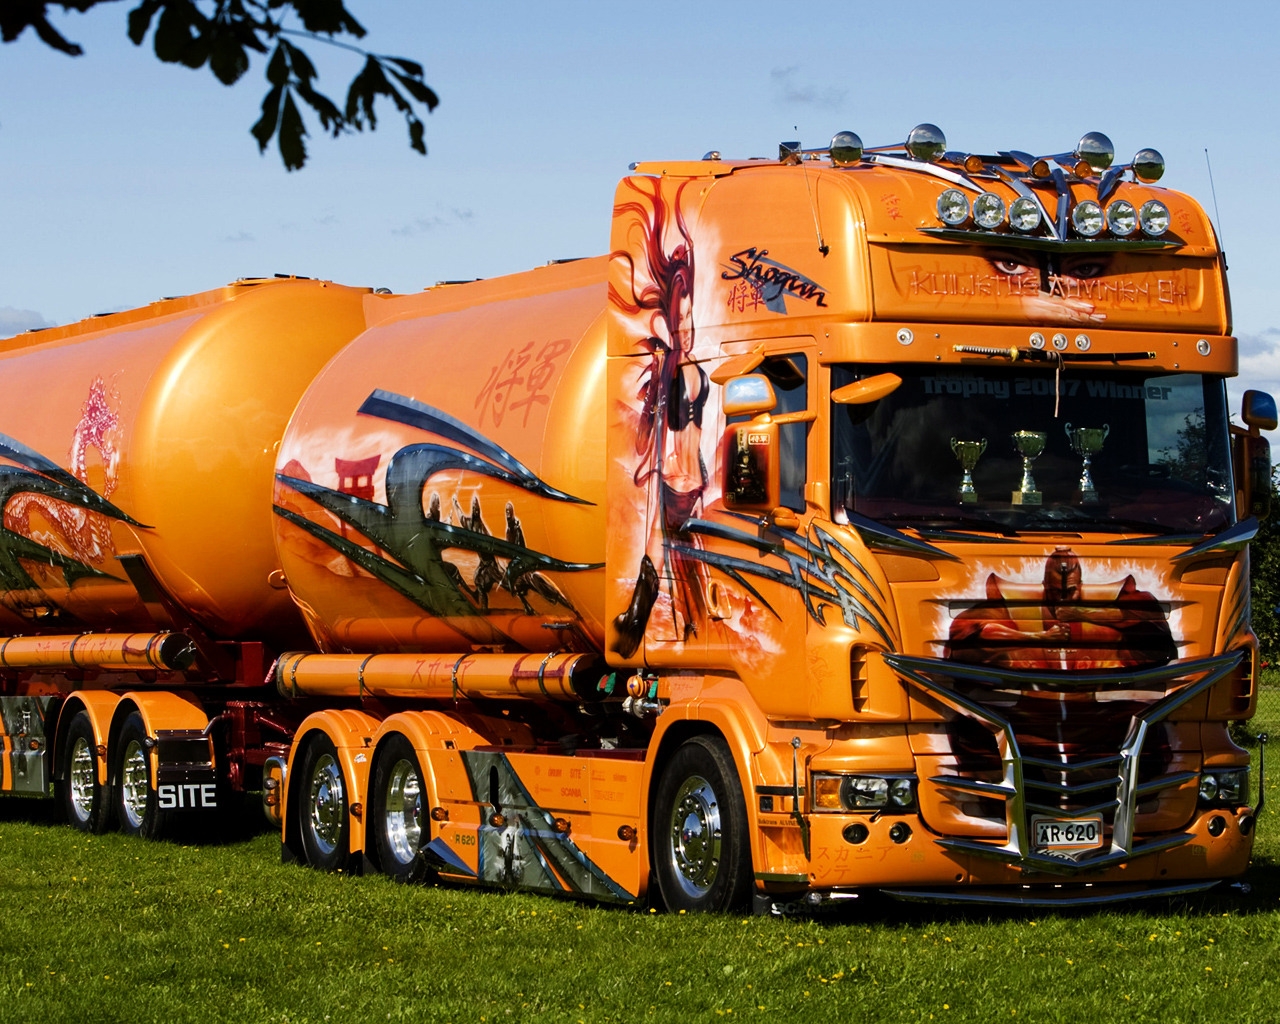 Scania Tanker for 1280 x 1024 resolution